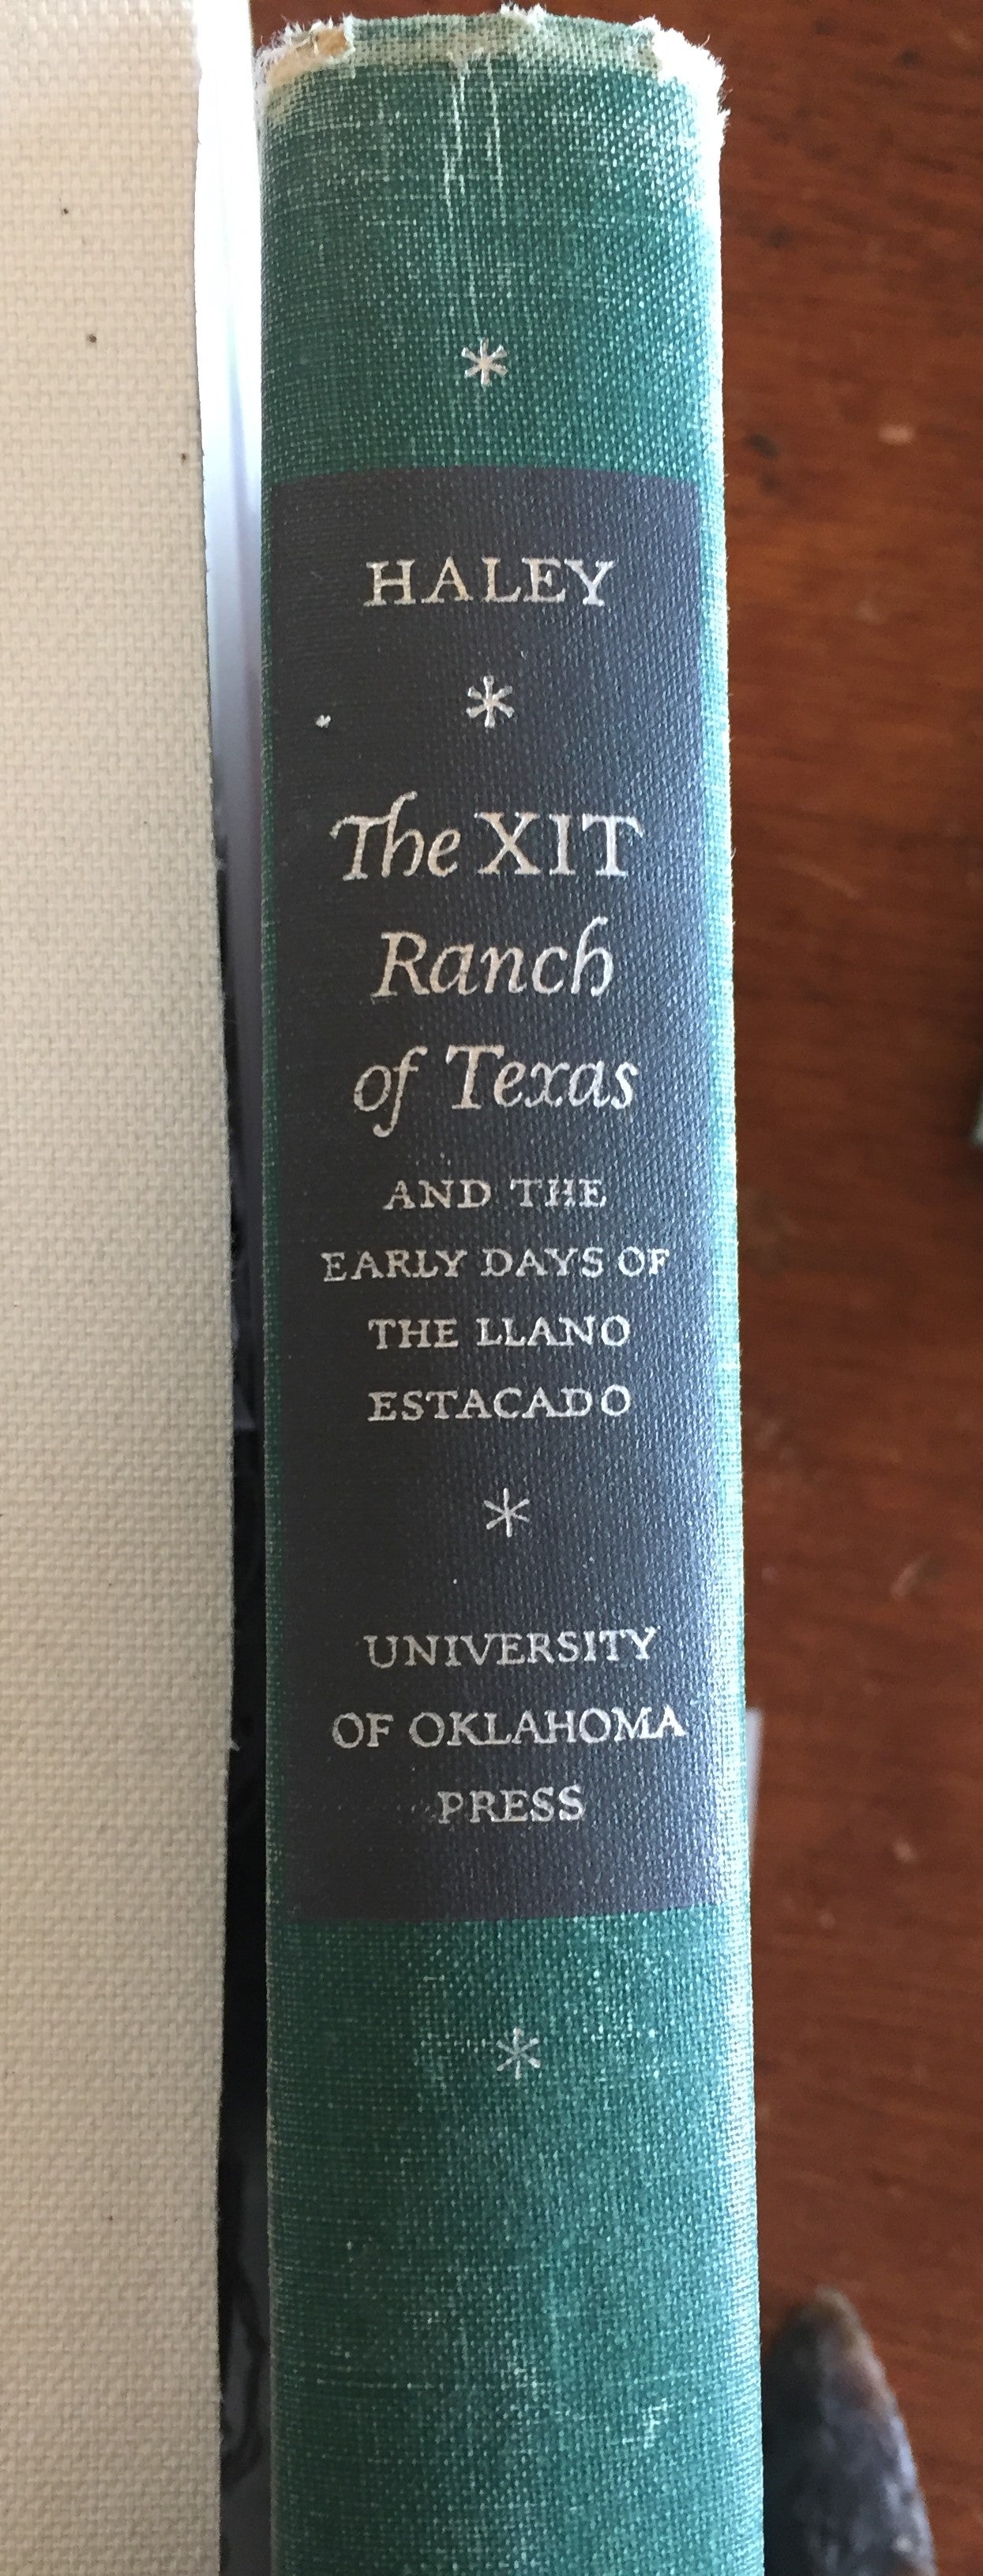 BOOKS - The XIT Ranch of Texas